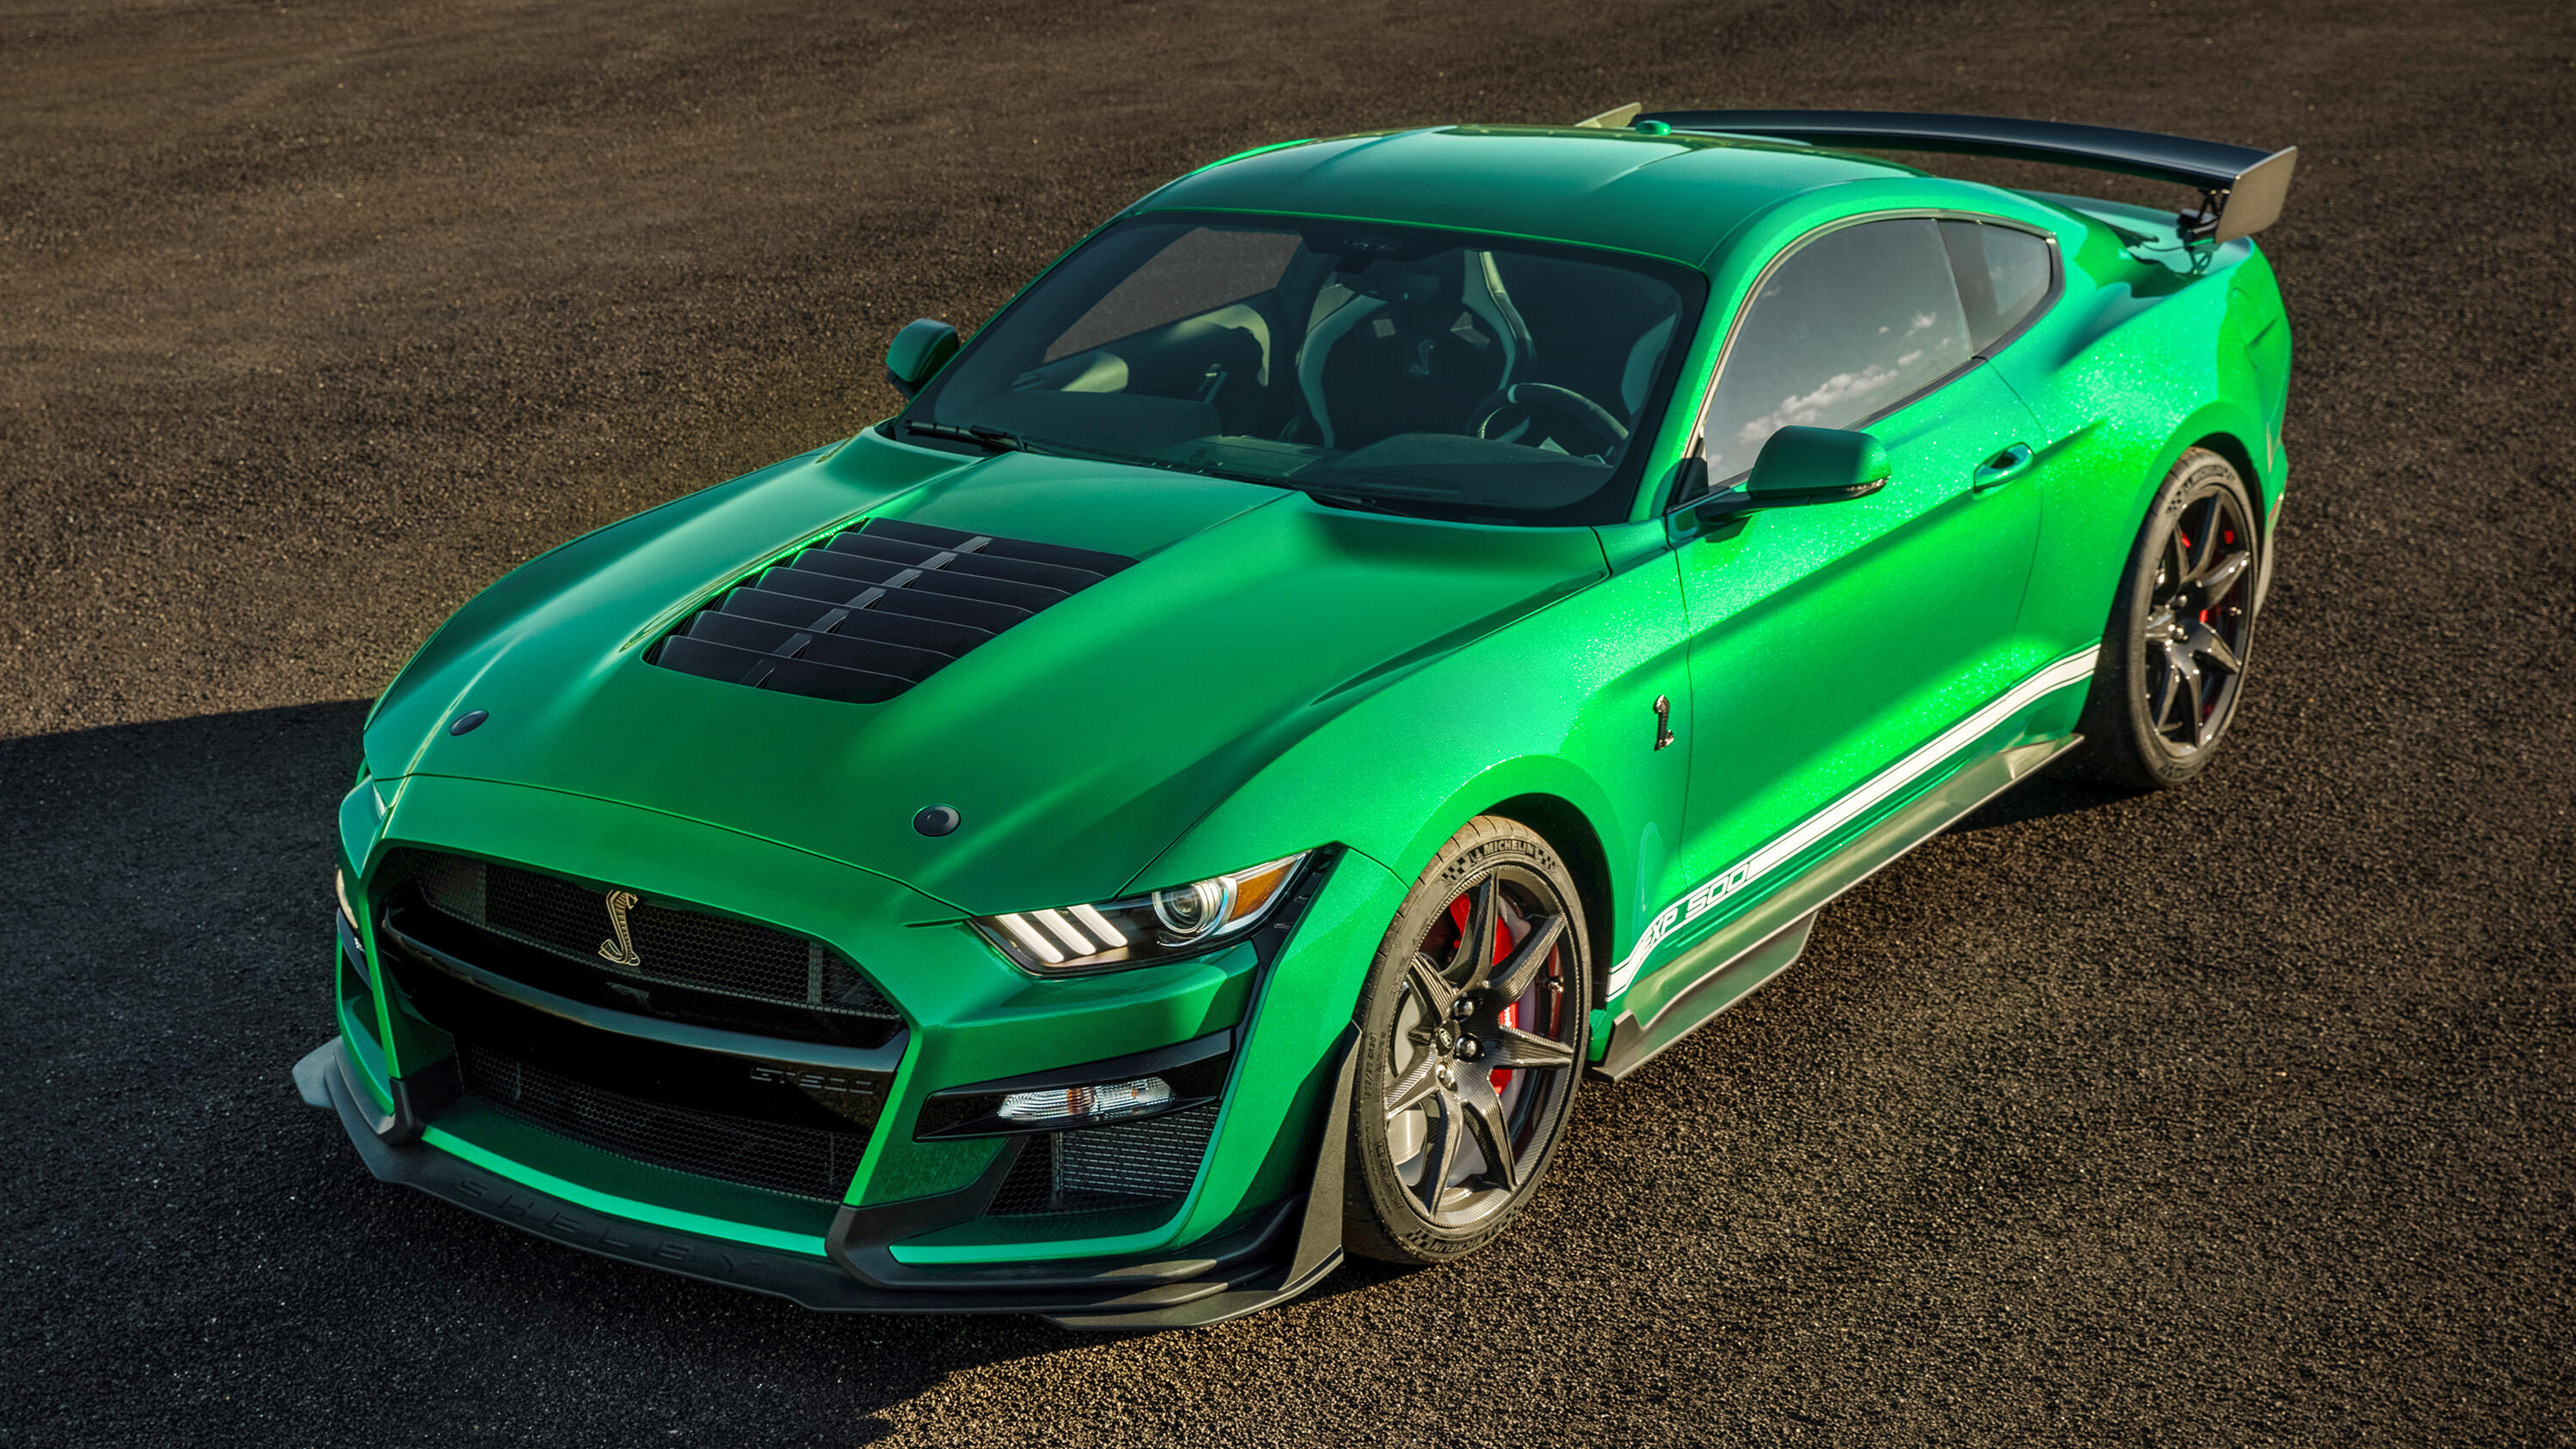 General 3000x1688 car Ford Mustang Ford Mustang Shelby green cars vehicle Ford Shelby Ford Mustang S550 muscle cars American cars